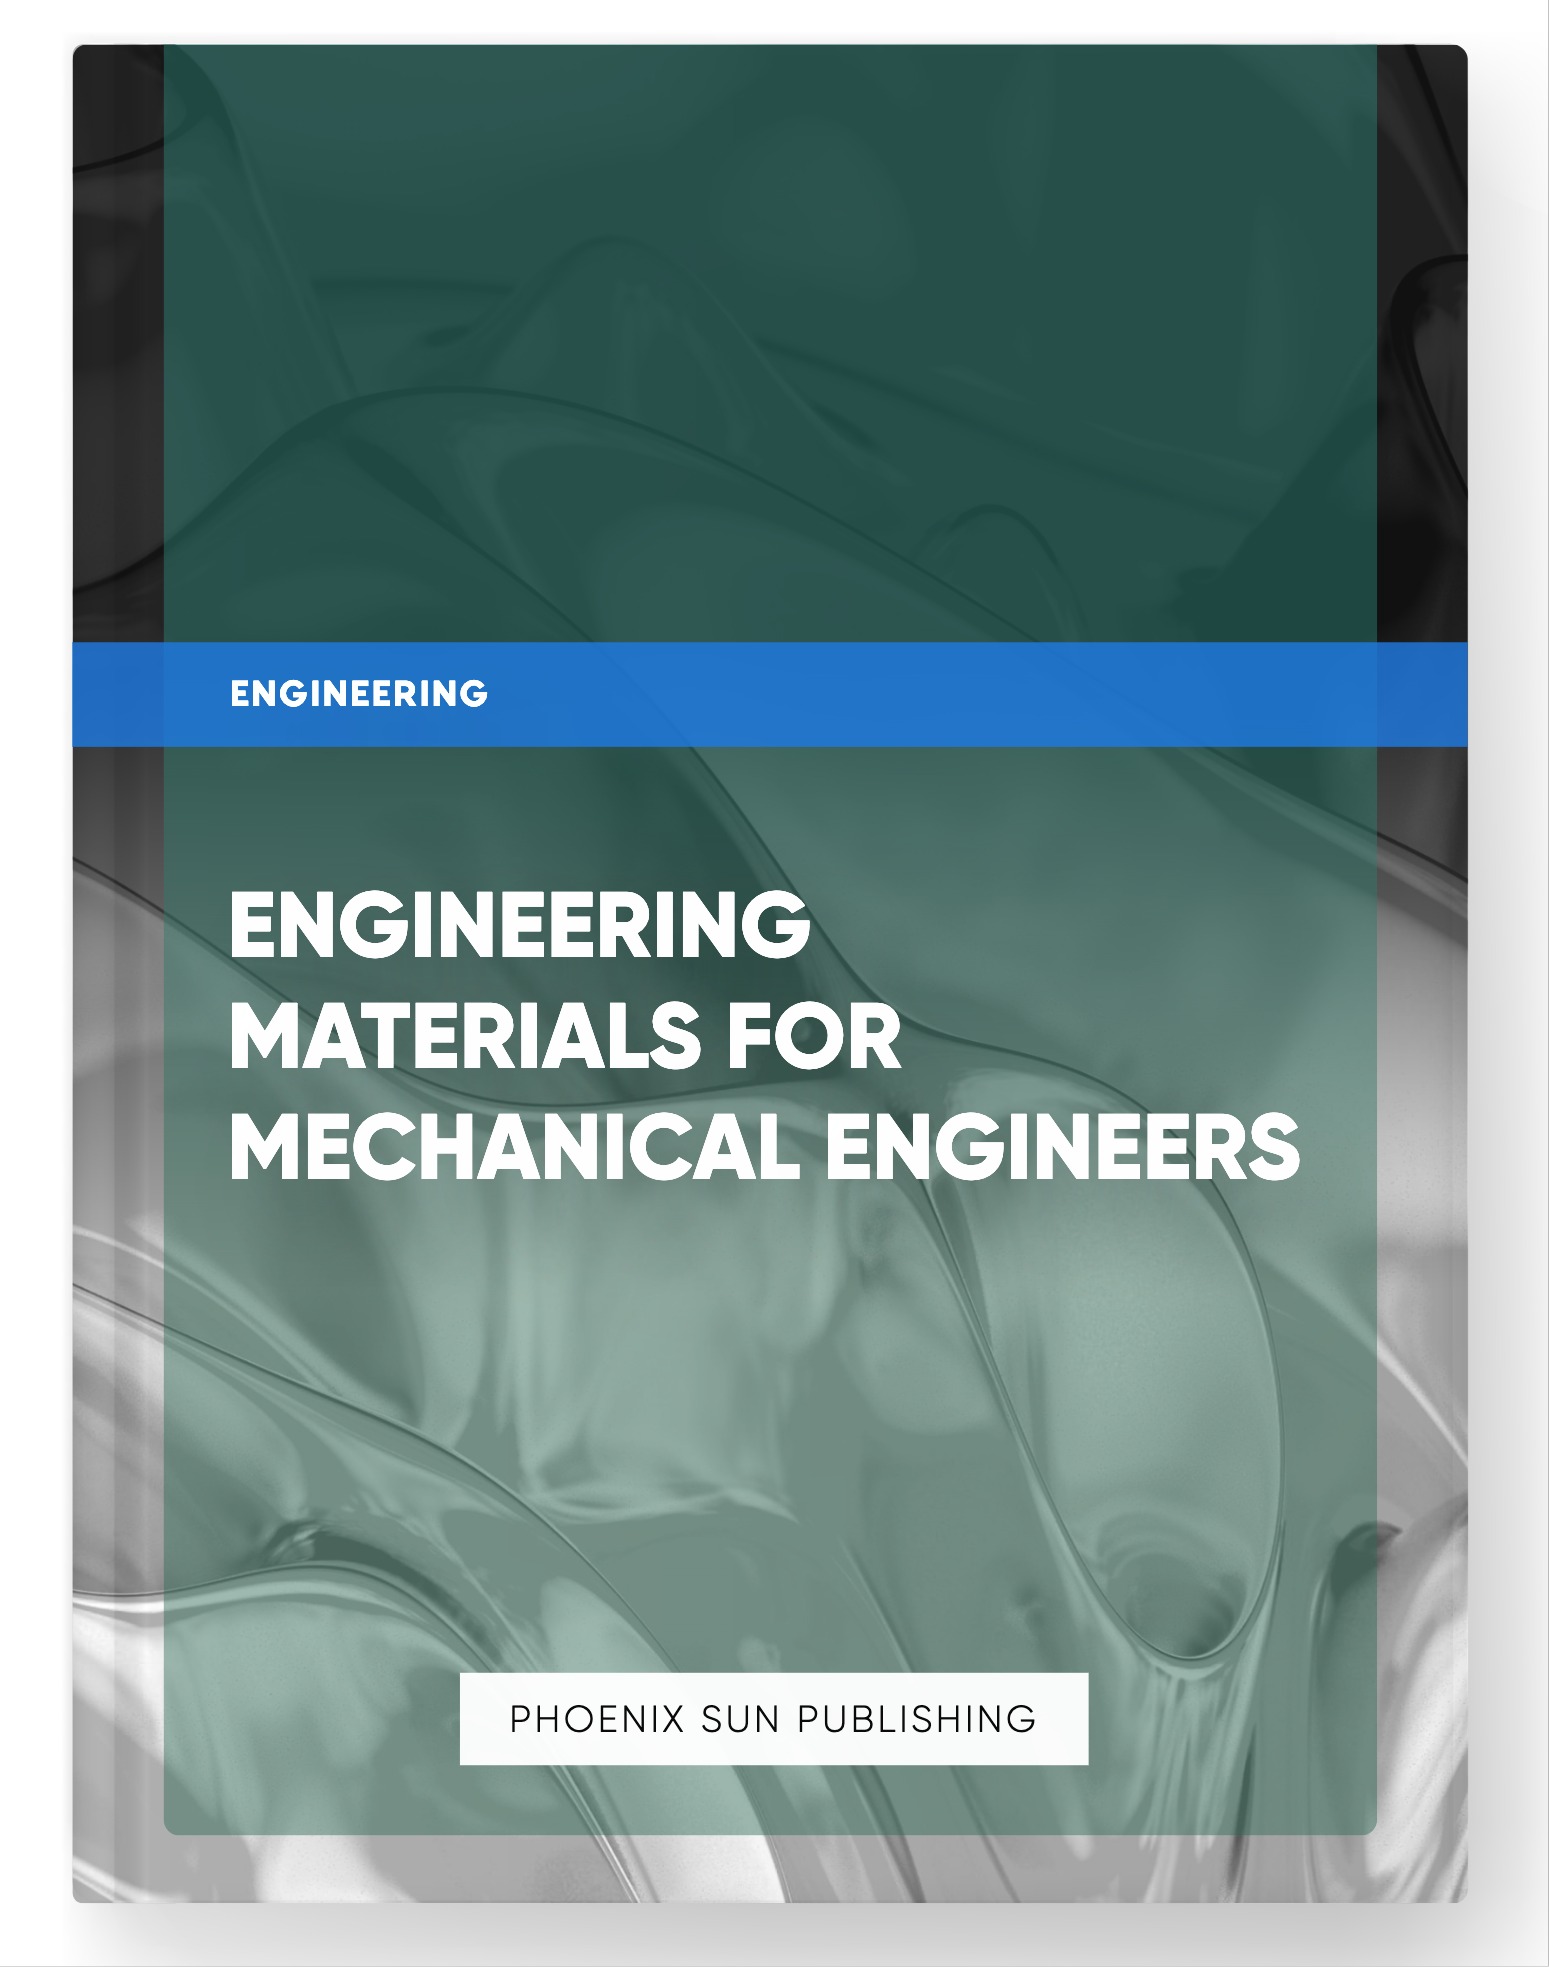 Engineering Materials for Mechanical Engineers